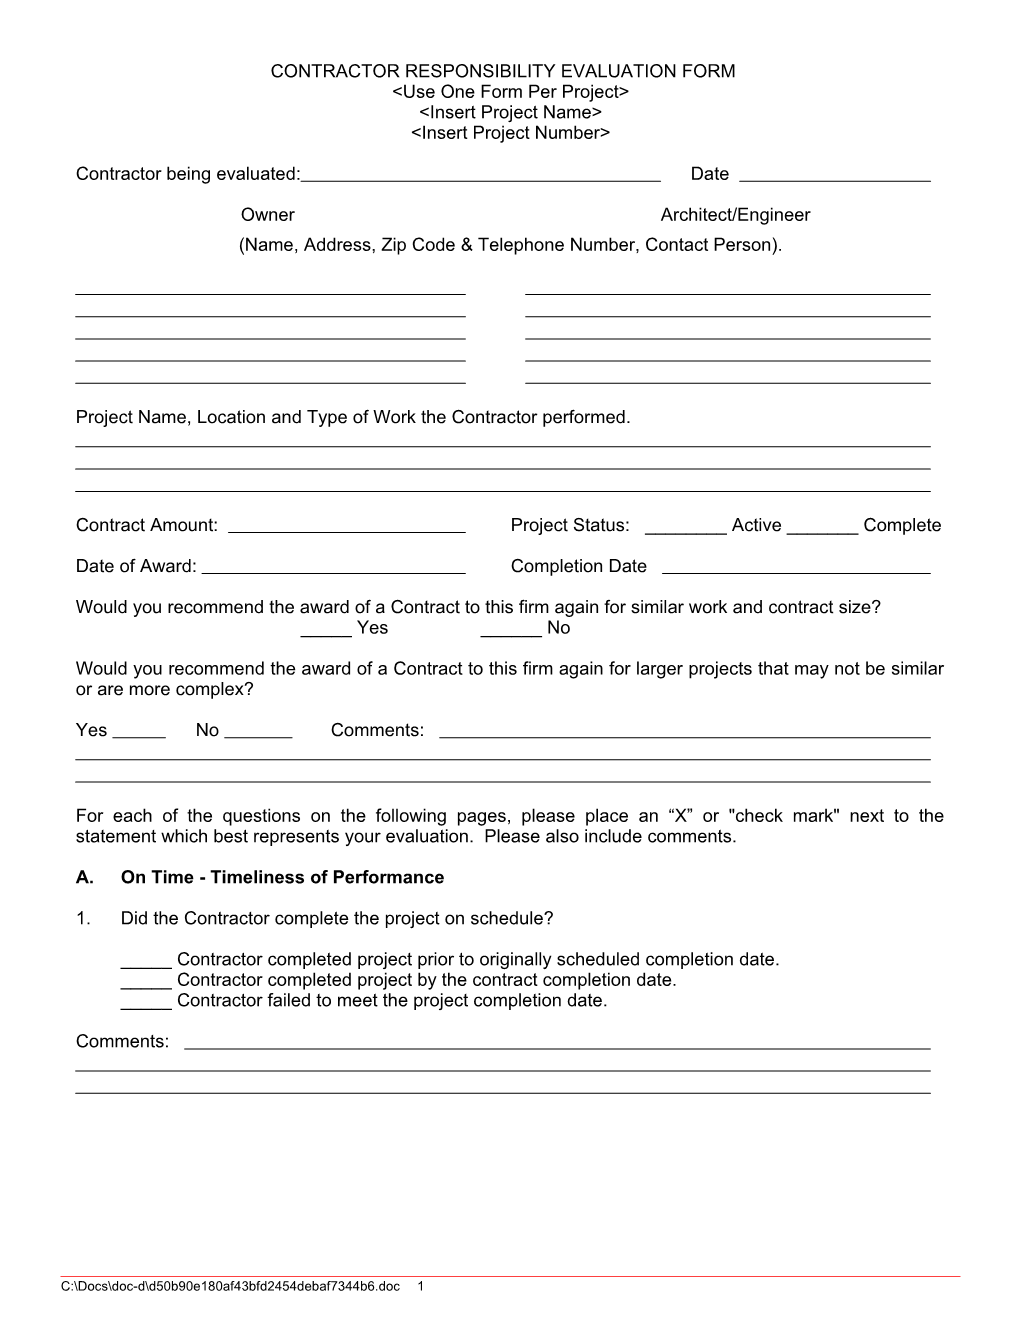 Contractor Responsibility Evaluation Form